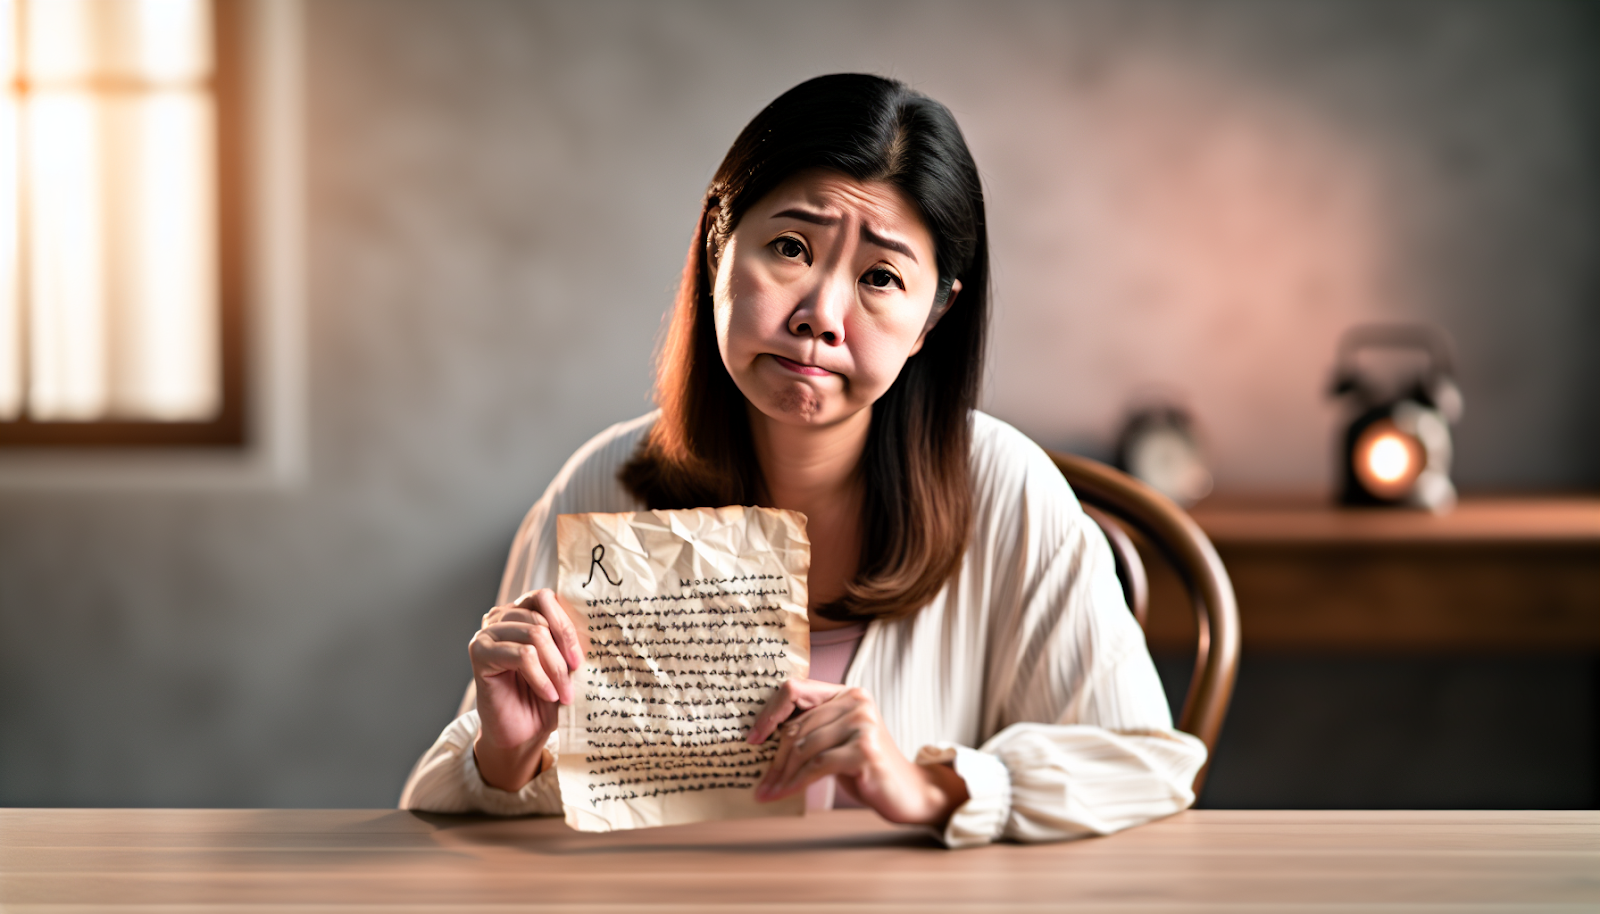 A person holding a handwritten apology letter, acknowledging wrongdoing